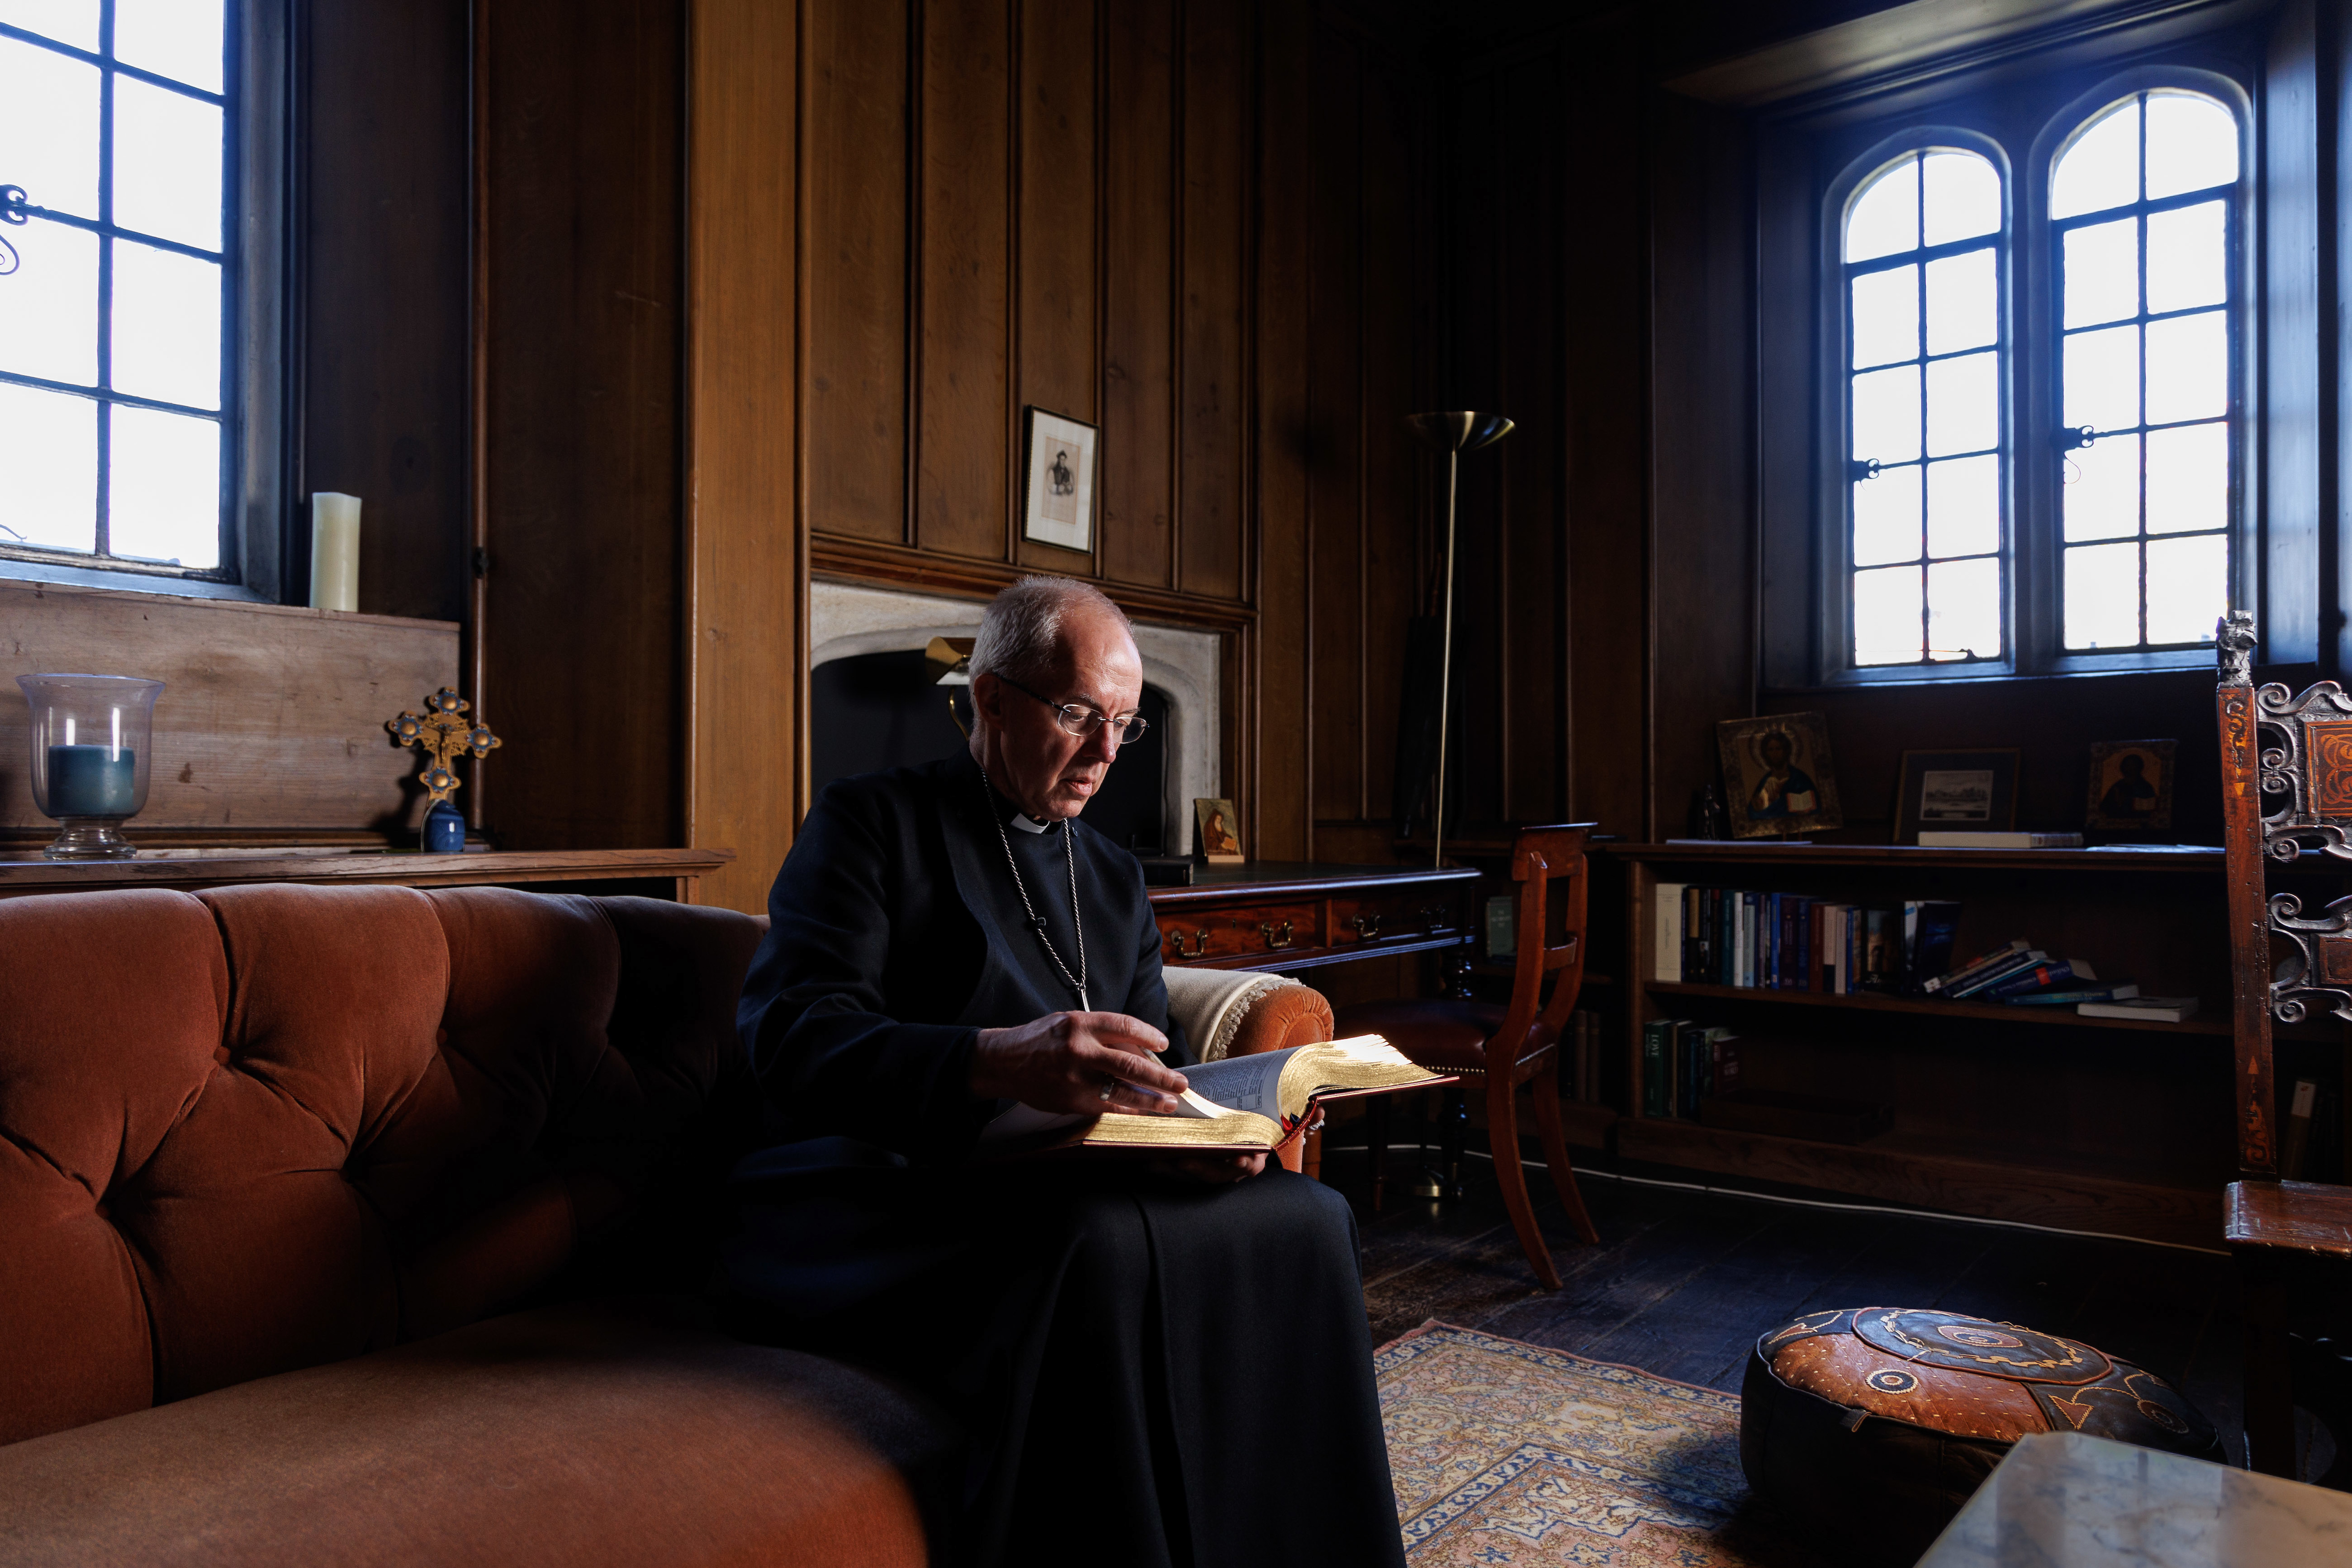 The Archbishop of Canterbury, the Most Revd Justin Welby, reading the King's Coronation Bible in the Cranmer Study at Lambeth Palace